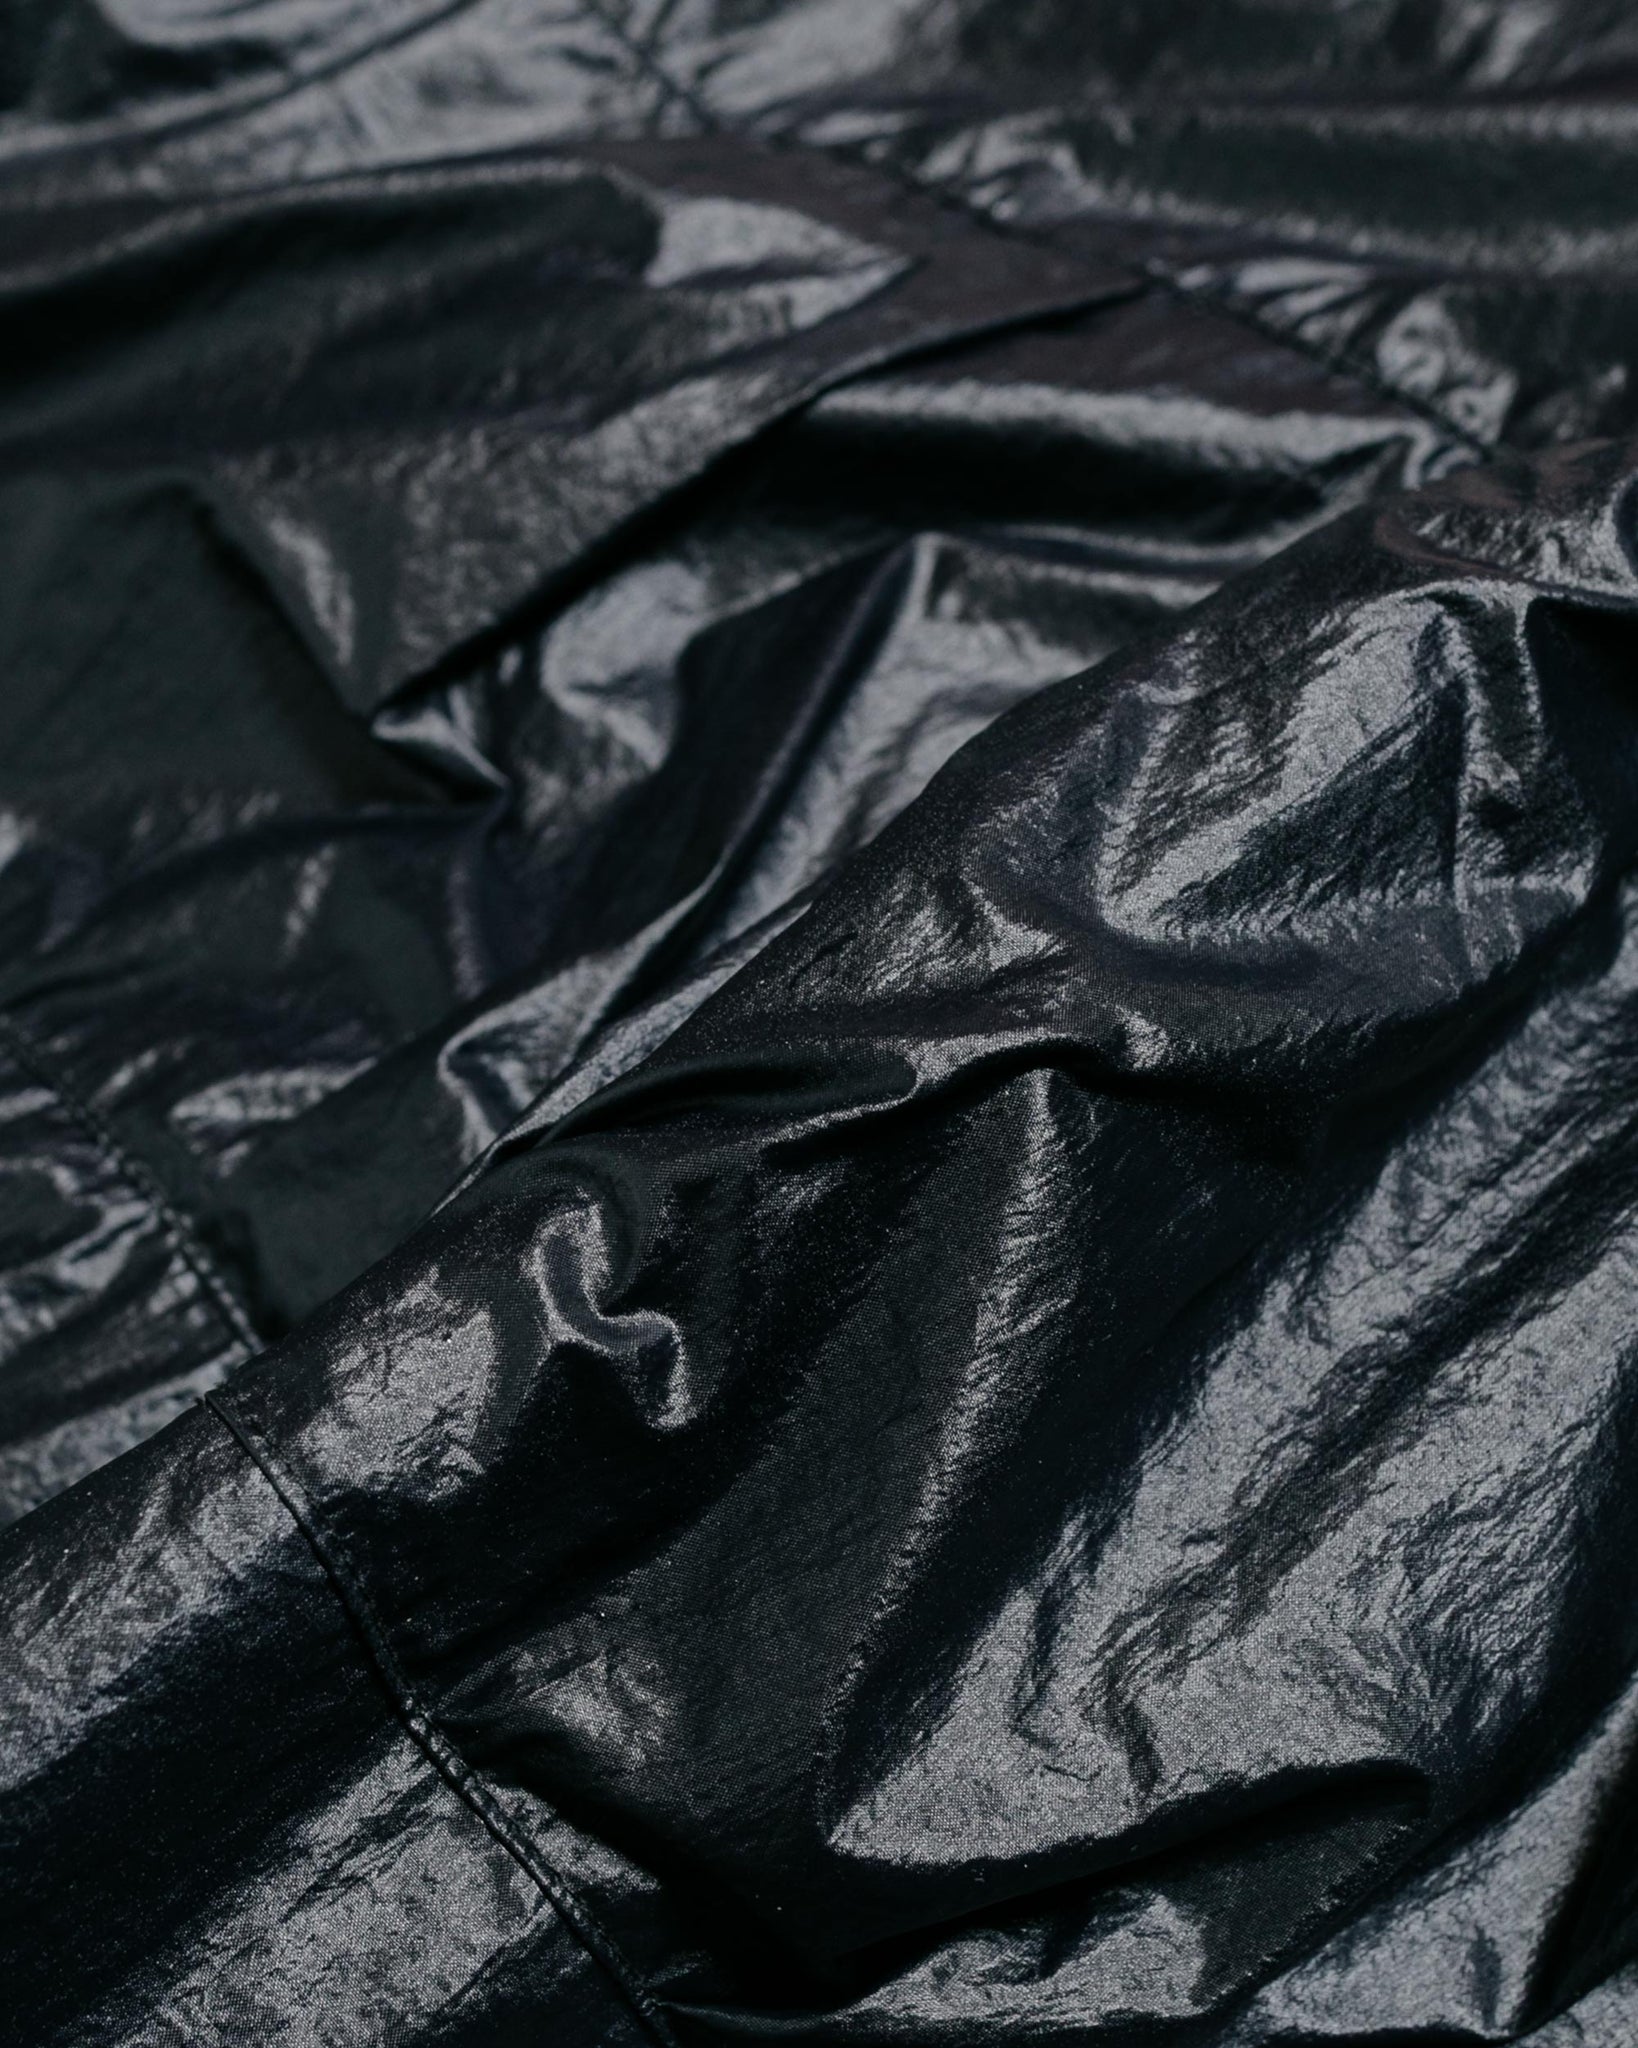 Our Legacy Exhaust Puffa Black Rubber Nylon fabric